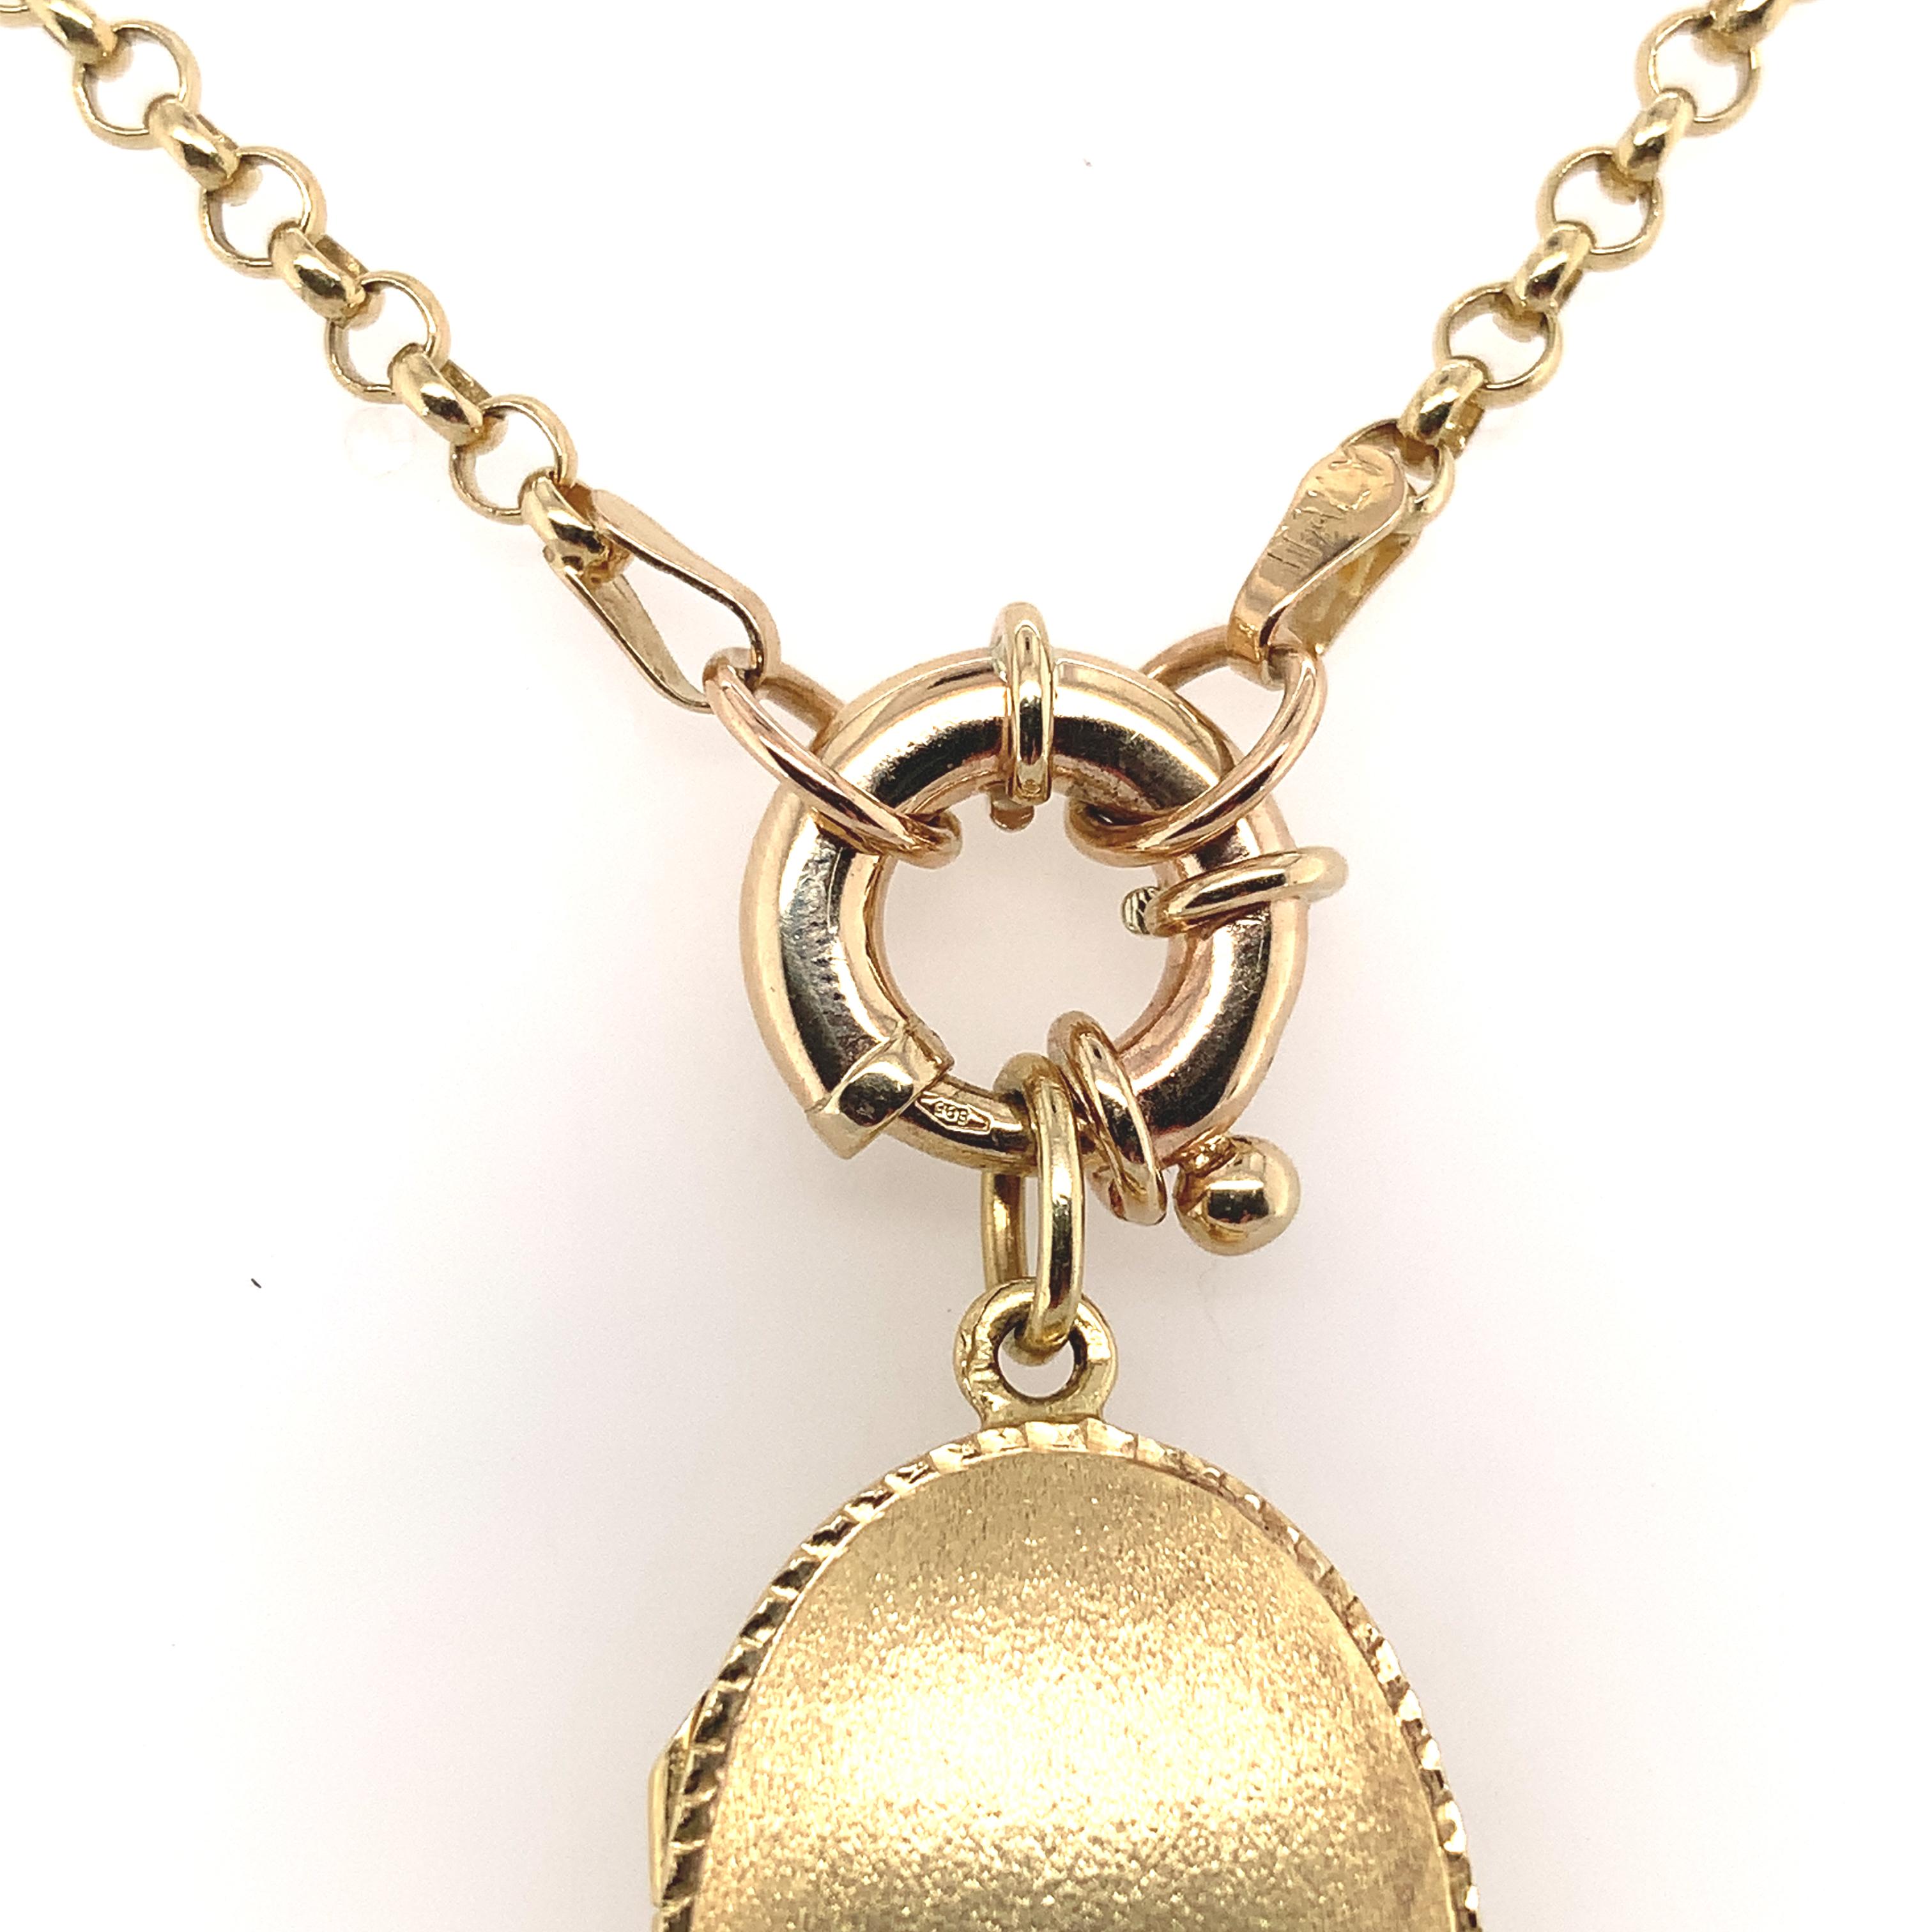 14K Yellow Gold Oval Locket with Decorative Heavy Chain In Good Condition For Sale In Big Bend, WI